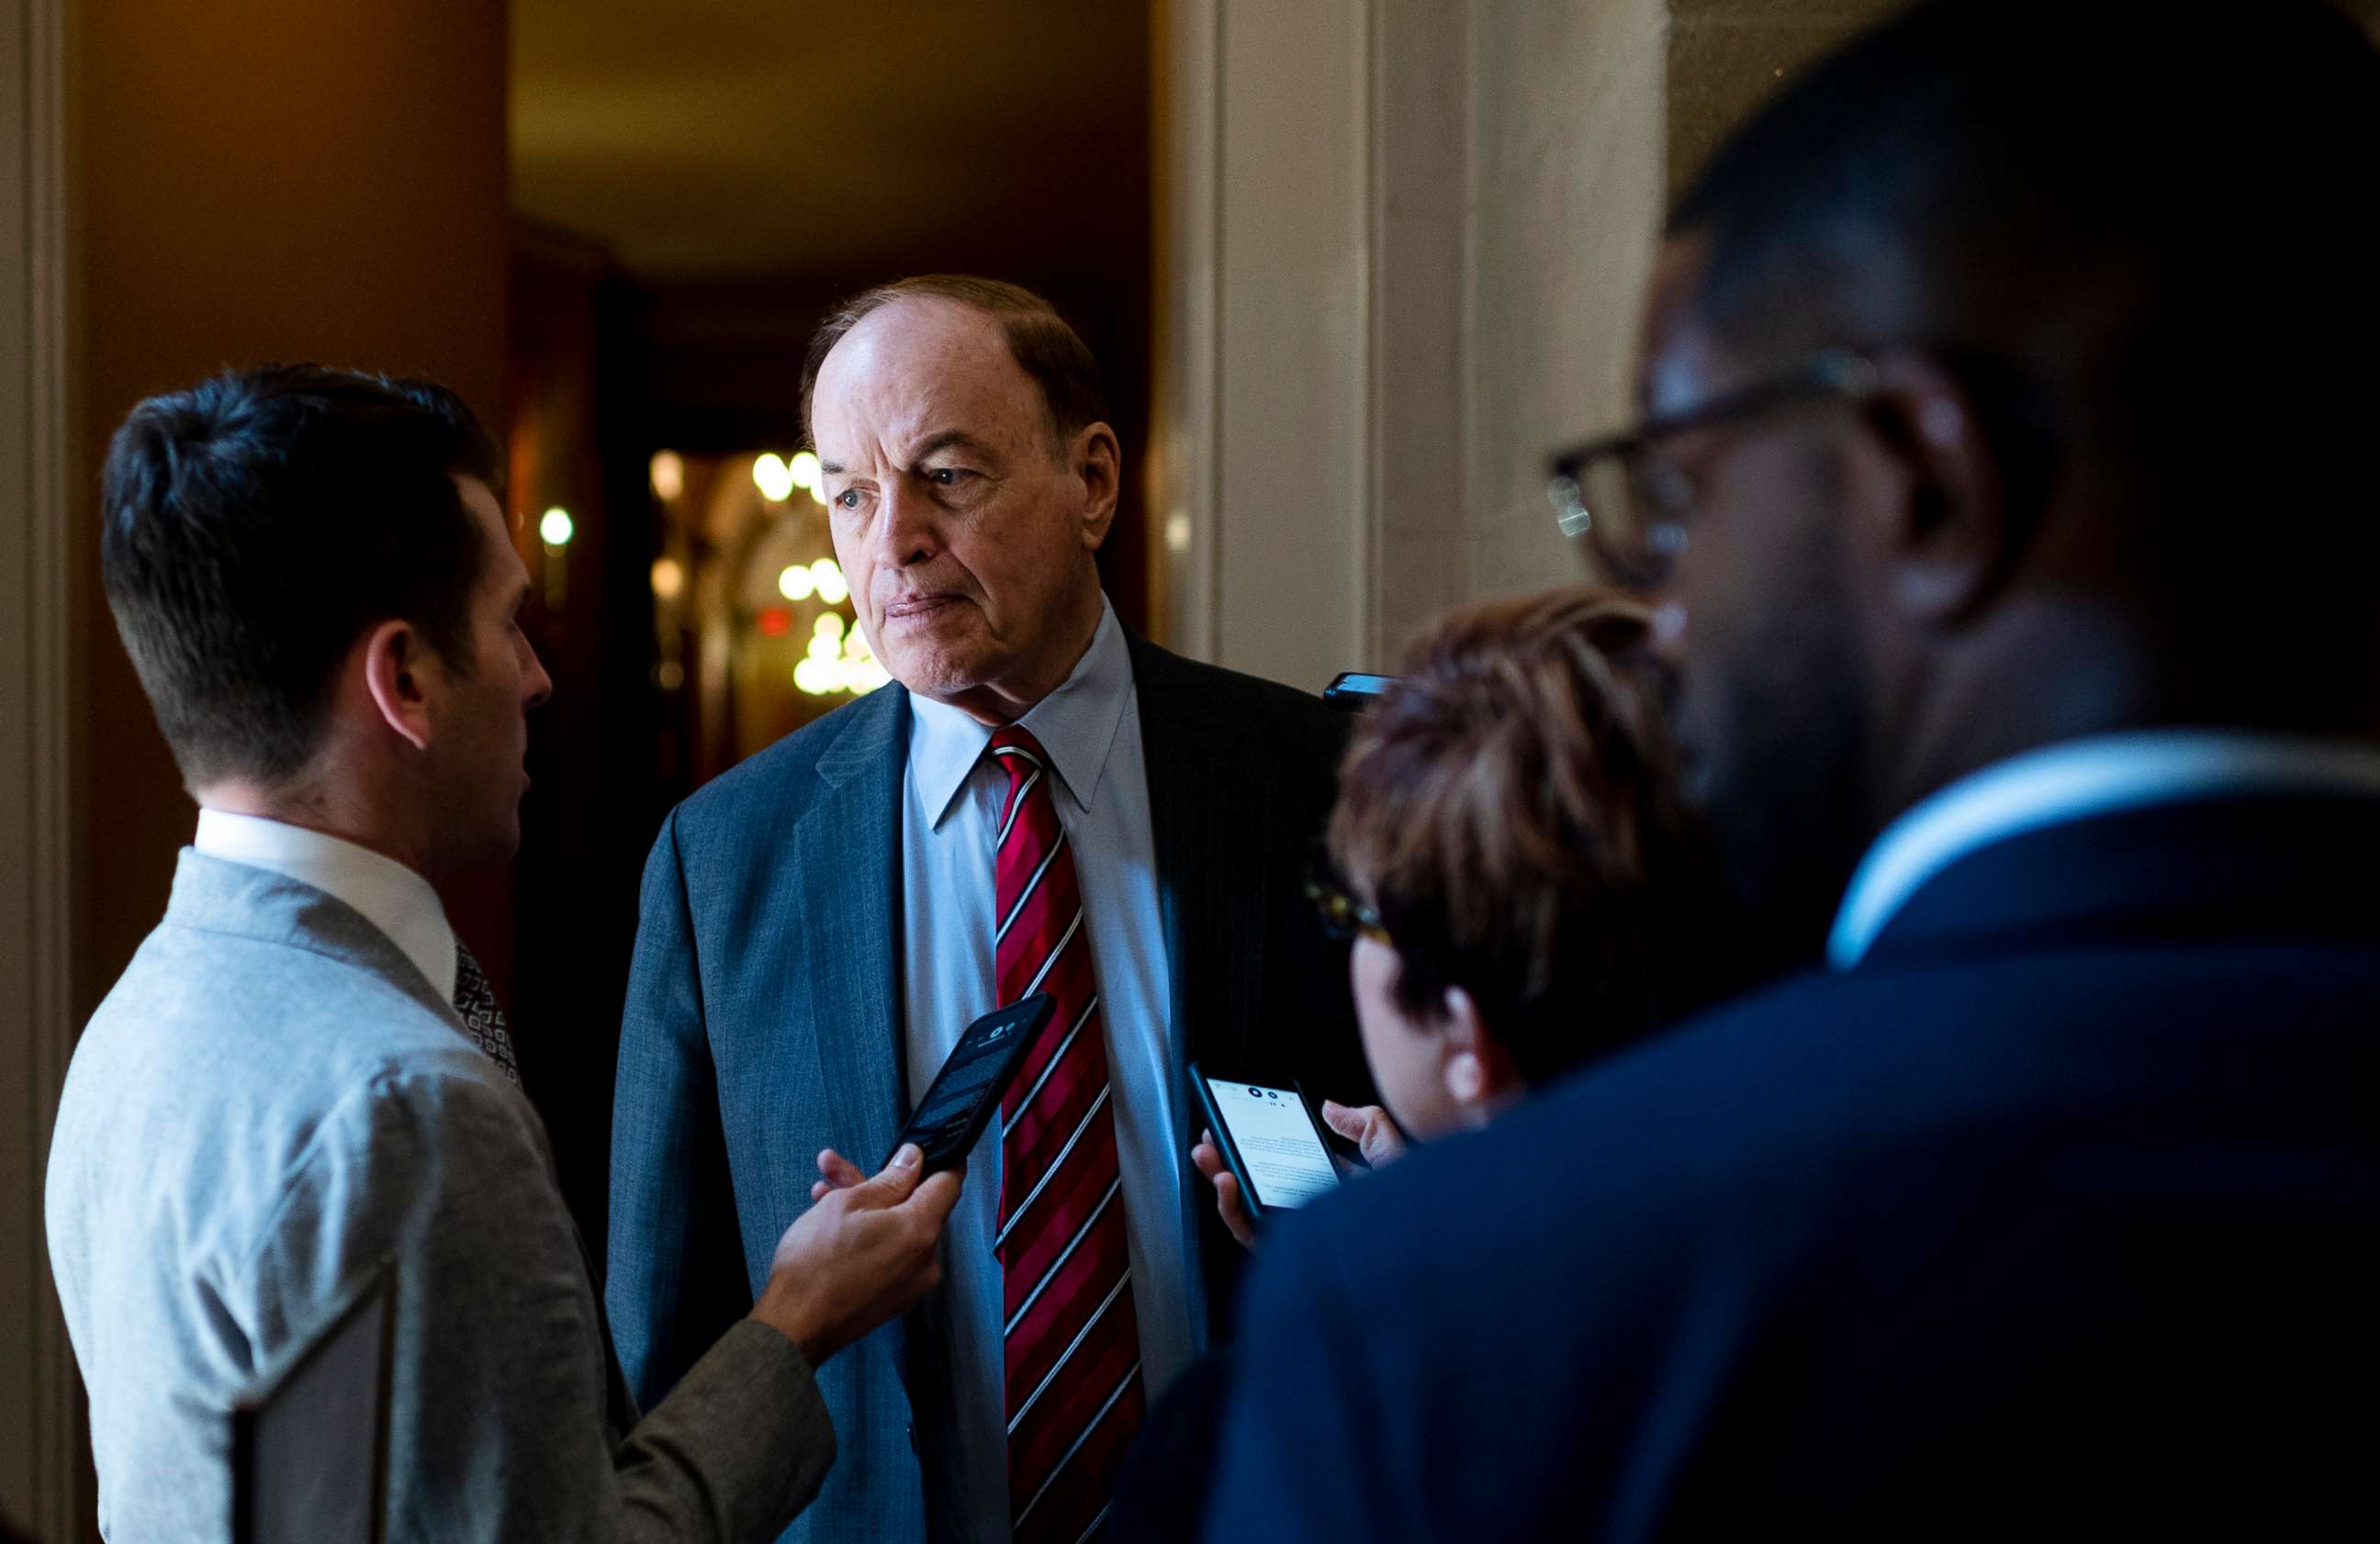 PHOTO: Sen. Richard Shelby, R-Ala., announces there is a deal on the Coronavirus supplemental funding bill as he emerges from a meeting in the Strom Thurmond Room in the Capitol, March 4, 2020.